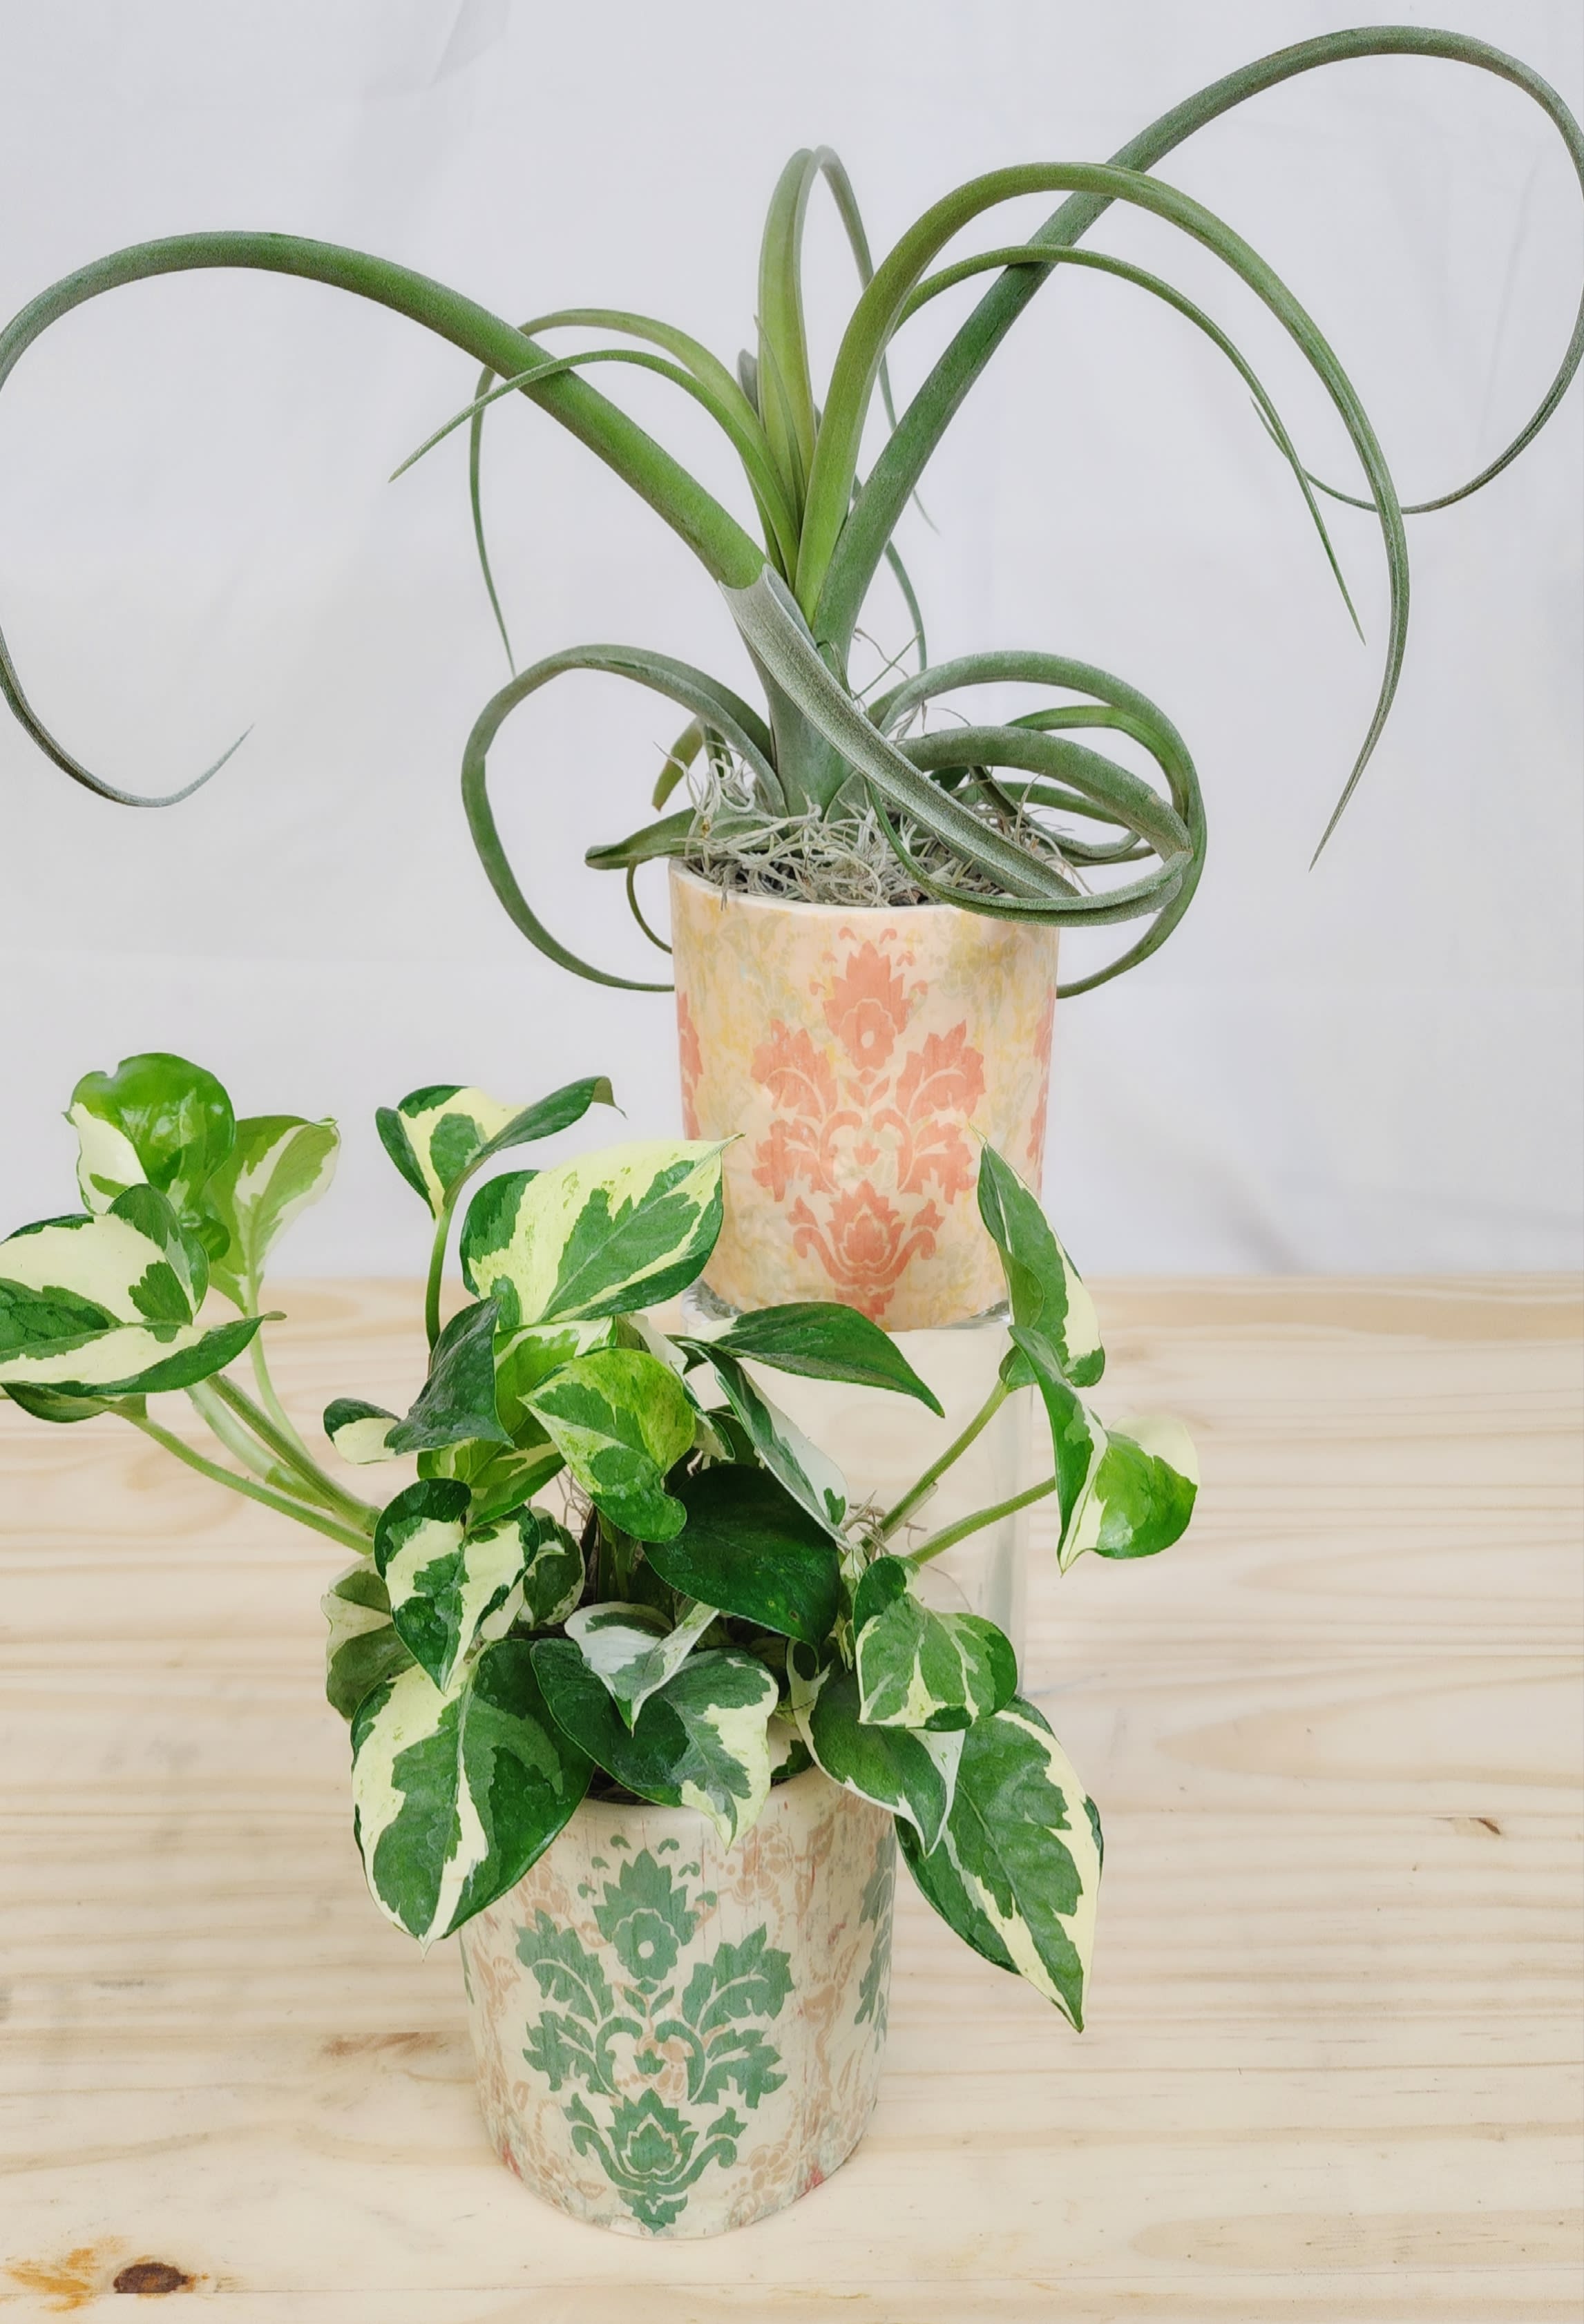 Pattern Plant Duet - 2 Patterned ceramic containers with seasonal green plants.  Great displayed together or in separate places. Add a little touch of fresh plants anywhere. Each one approx 7&quot; - 10&quot; tall with plants 